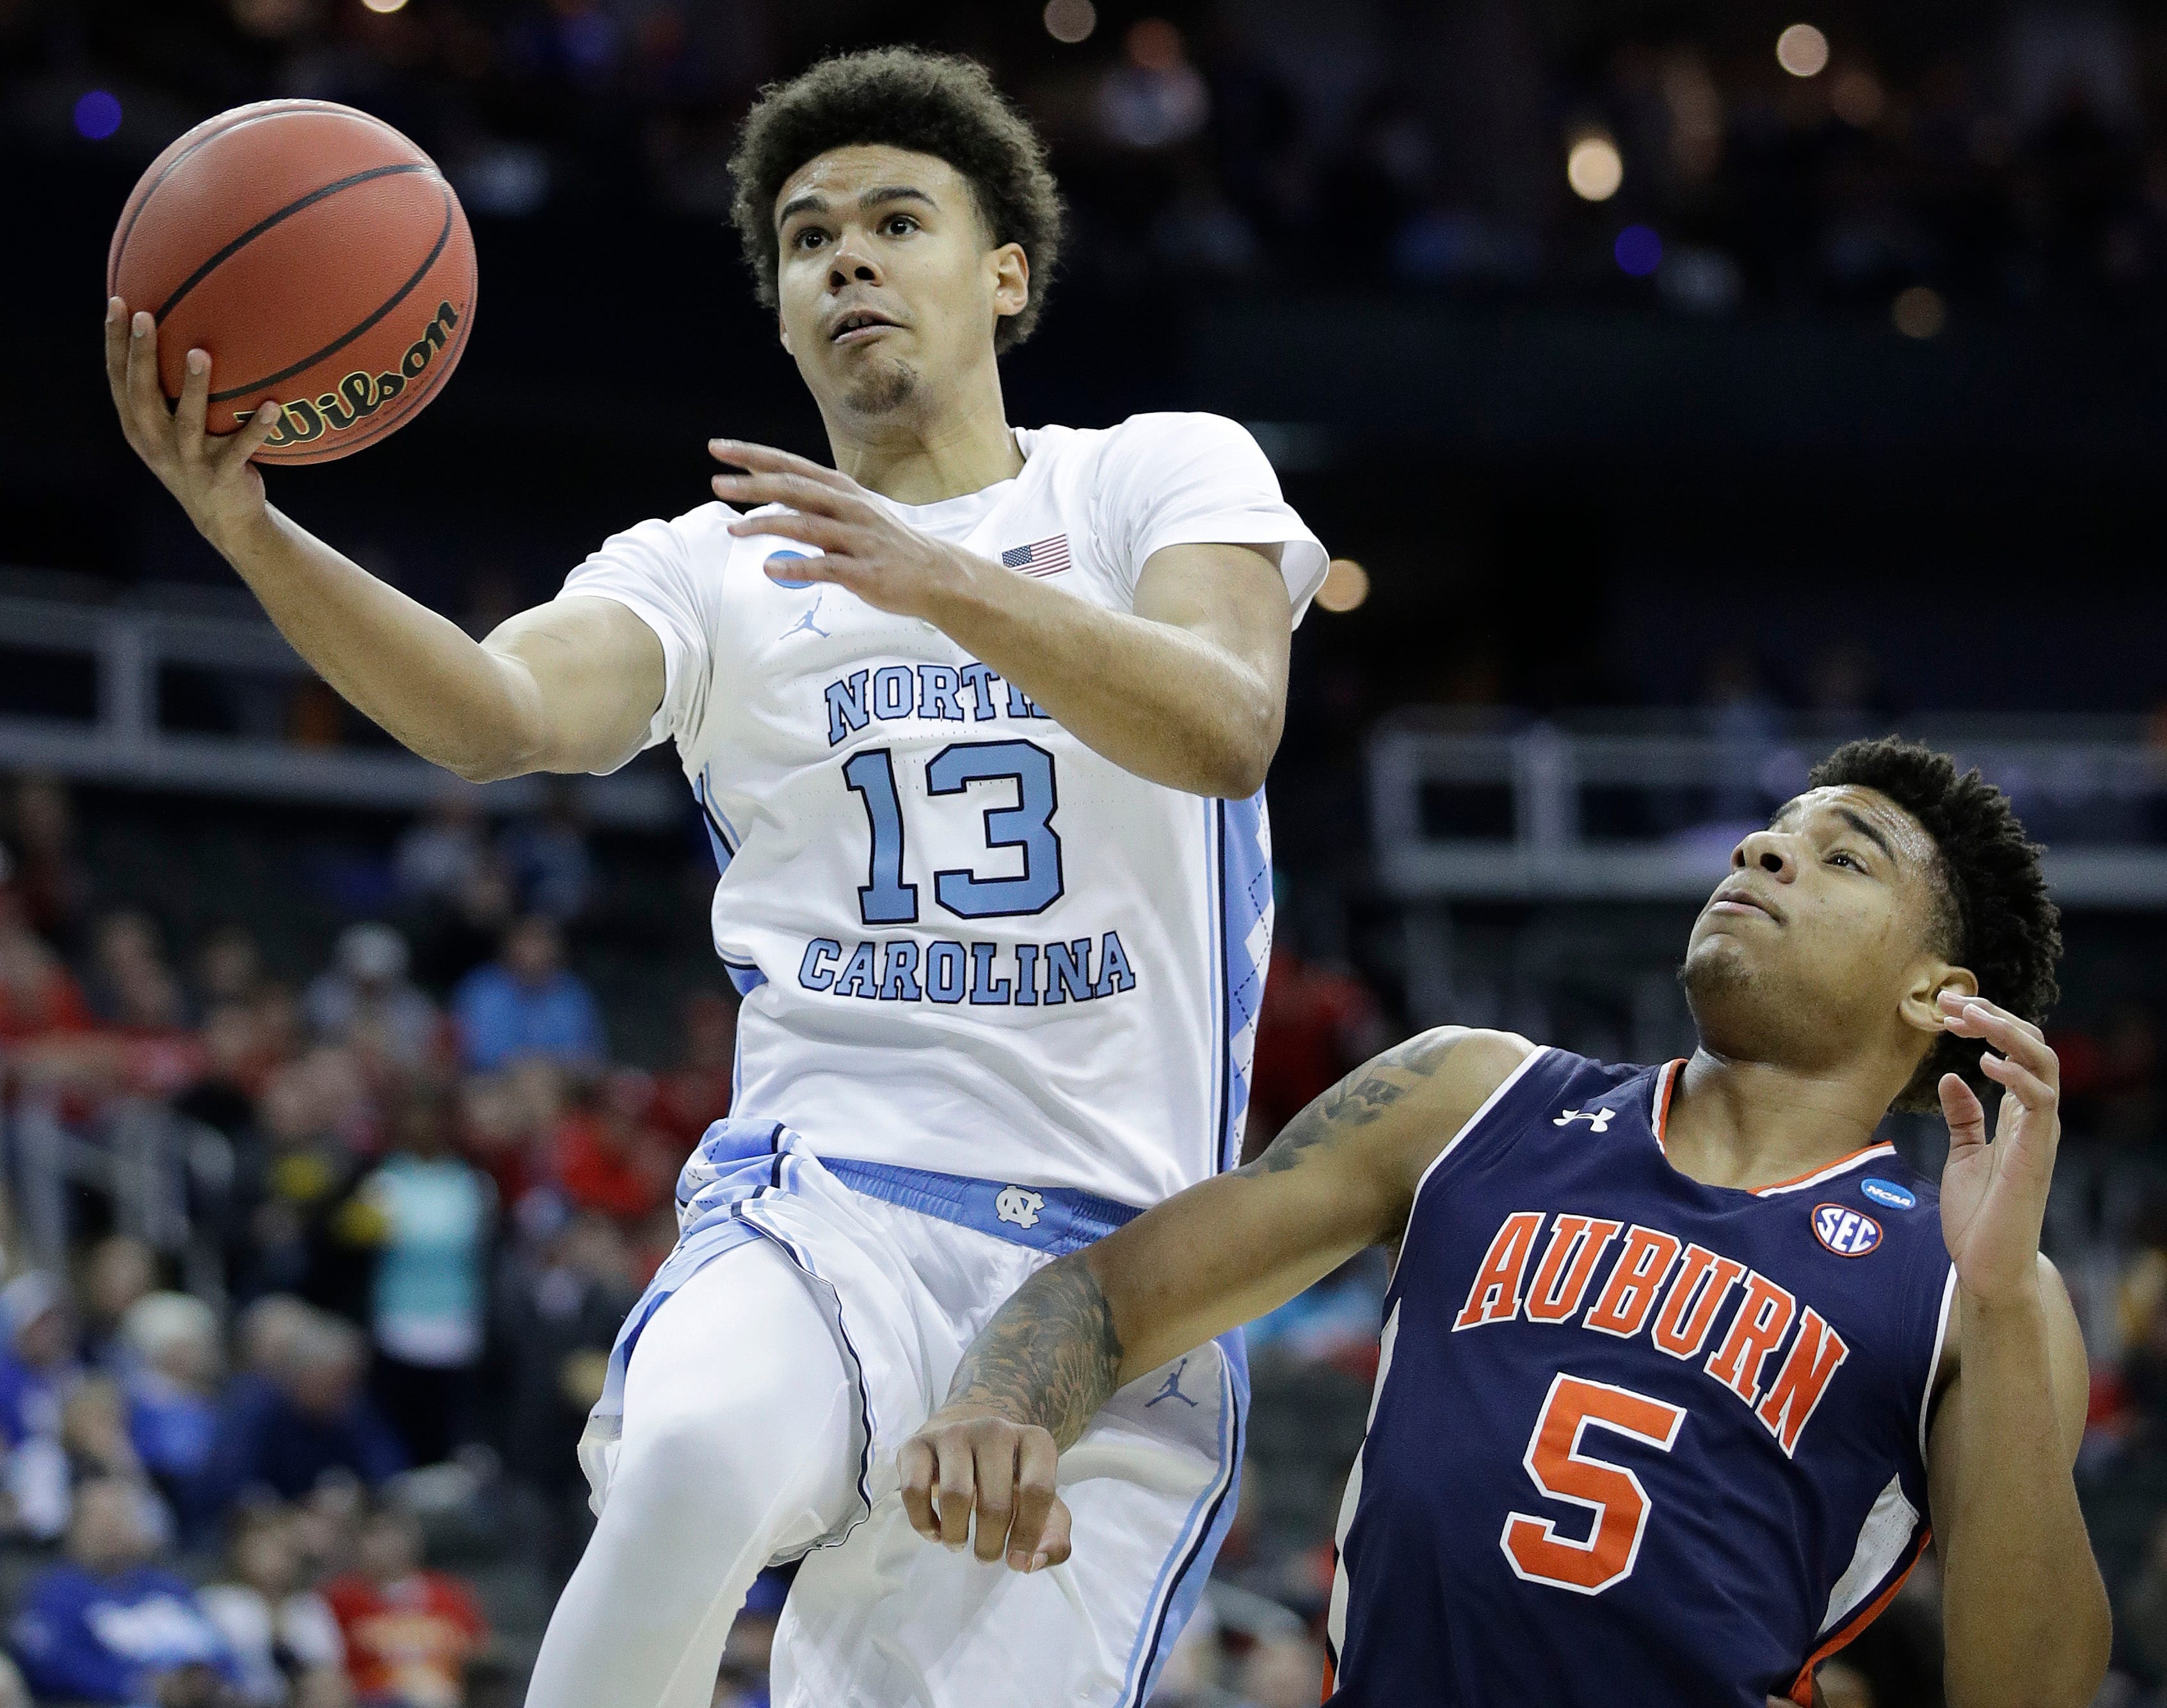 21. Oklahoma City Thunder: Cameron Johnson, wing, North Carolina. After another disappointing playoff loss, the Thunder will need to add some pieces but with little cap space, it’ll be tricky. Johnson could be one of the best shooters in the draft and with his good size at 6-9, he could be picked much higher.